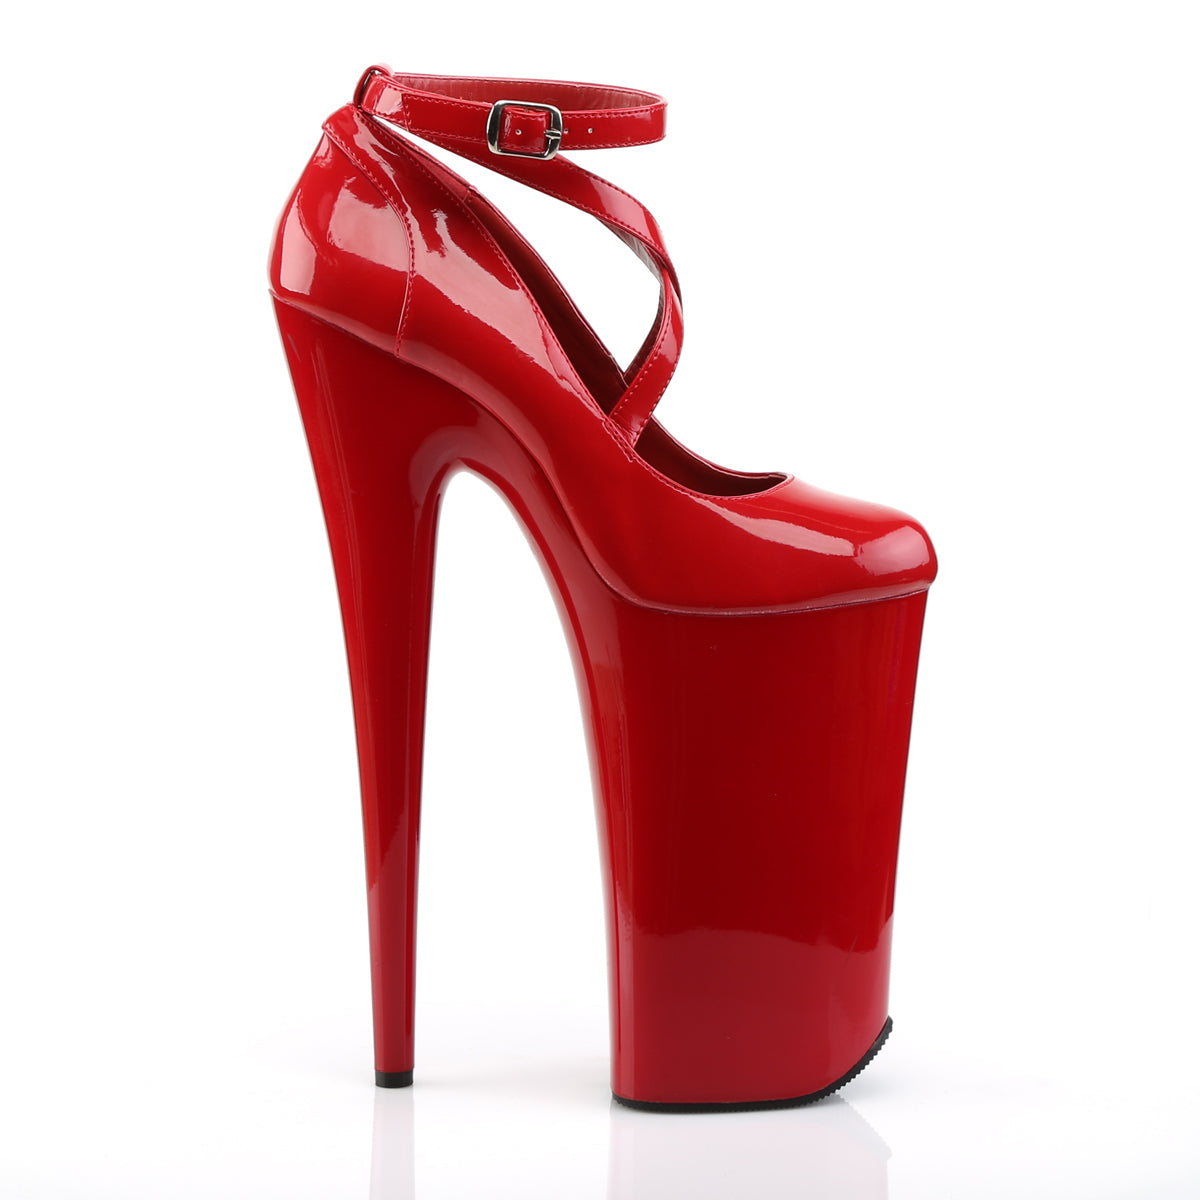 BEYOND-087 Pleaser Red/Red Platform Shoes [Extreme High Heels]